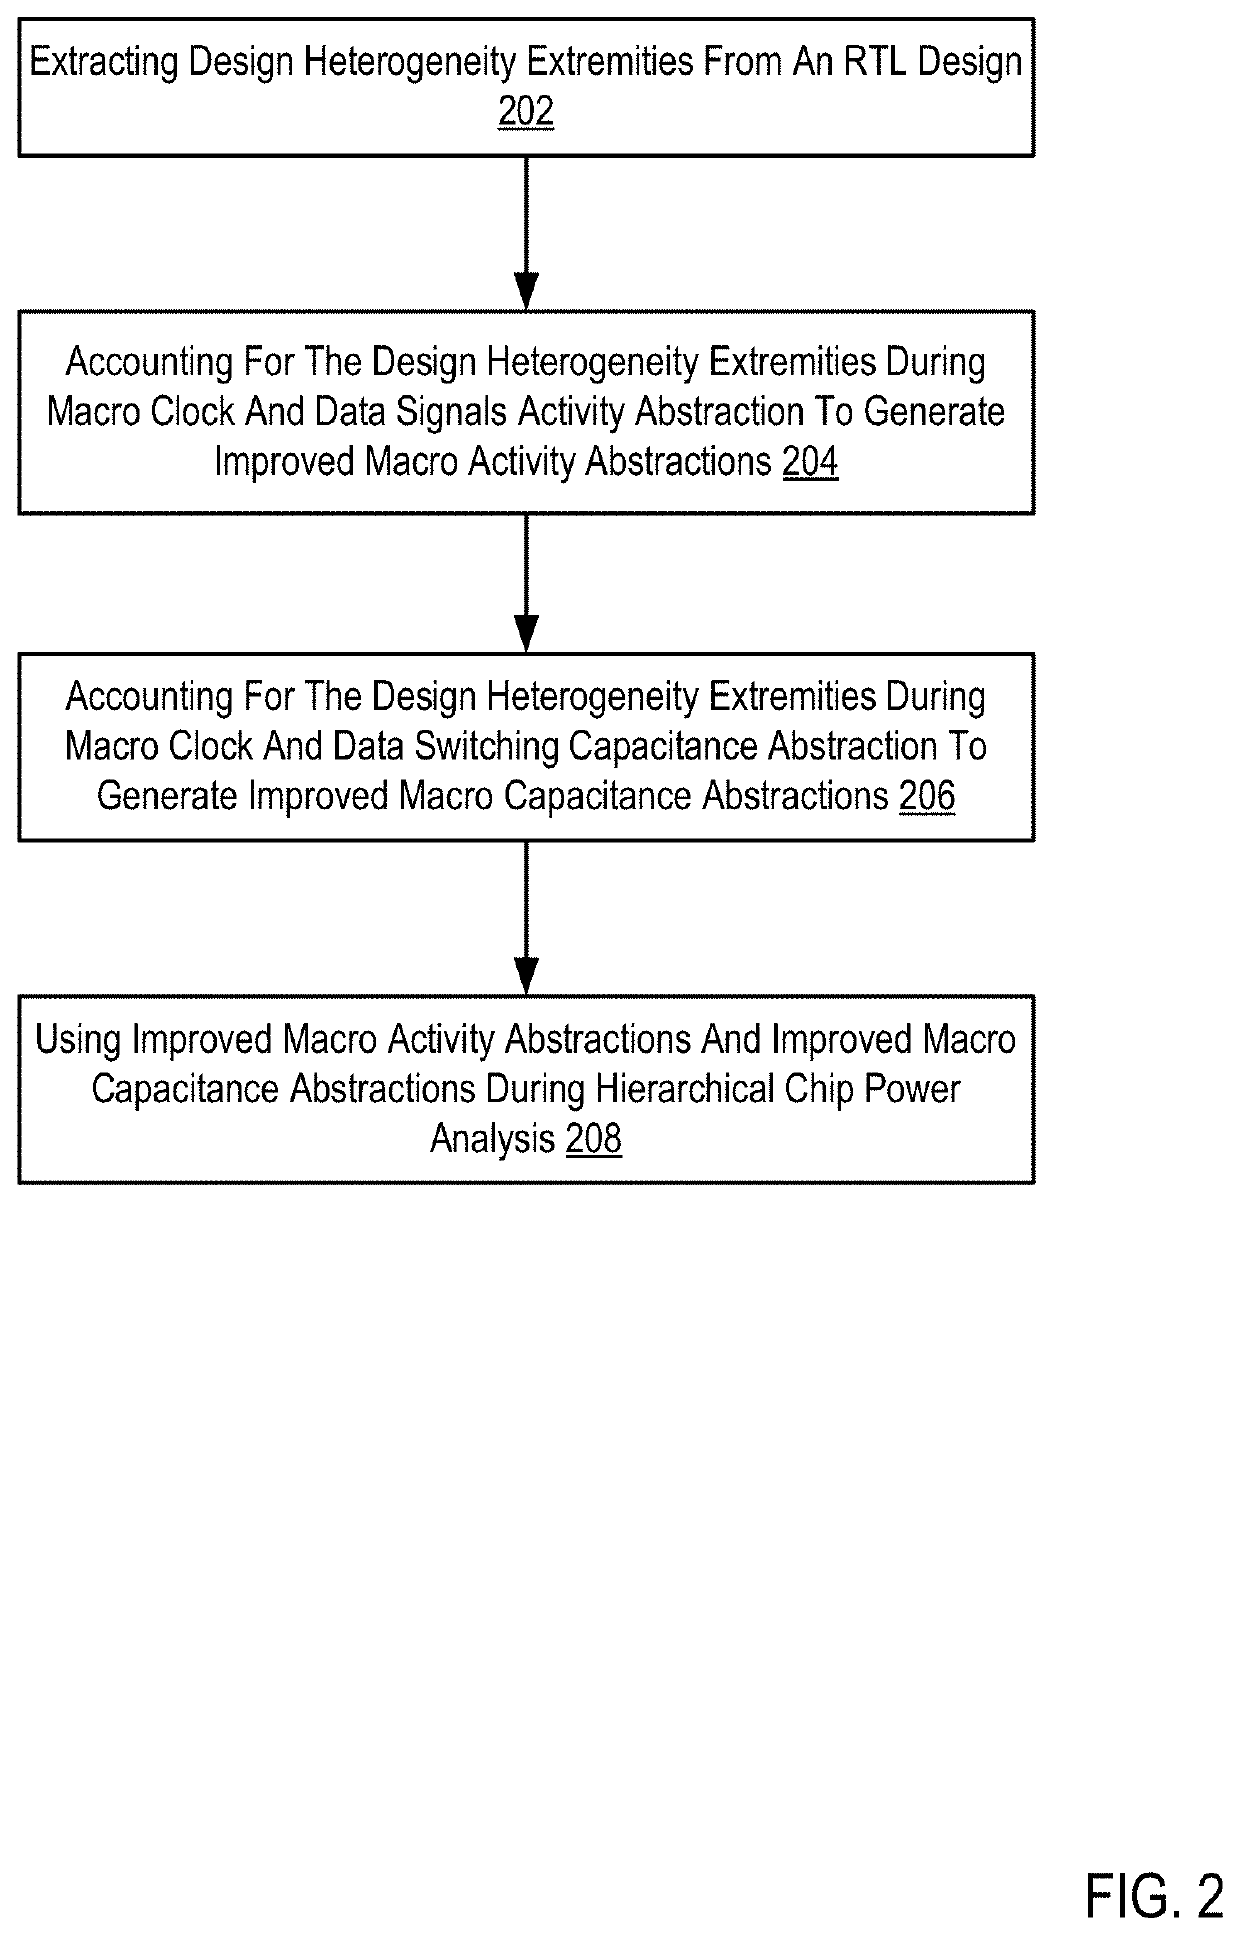 Hierarchical power analysis using improved activity abstraction and capacitance abstraction by accounting for design heterogeneity extremities